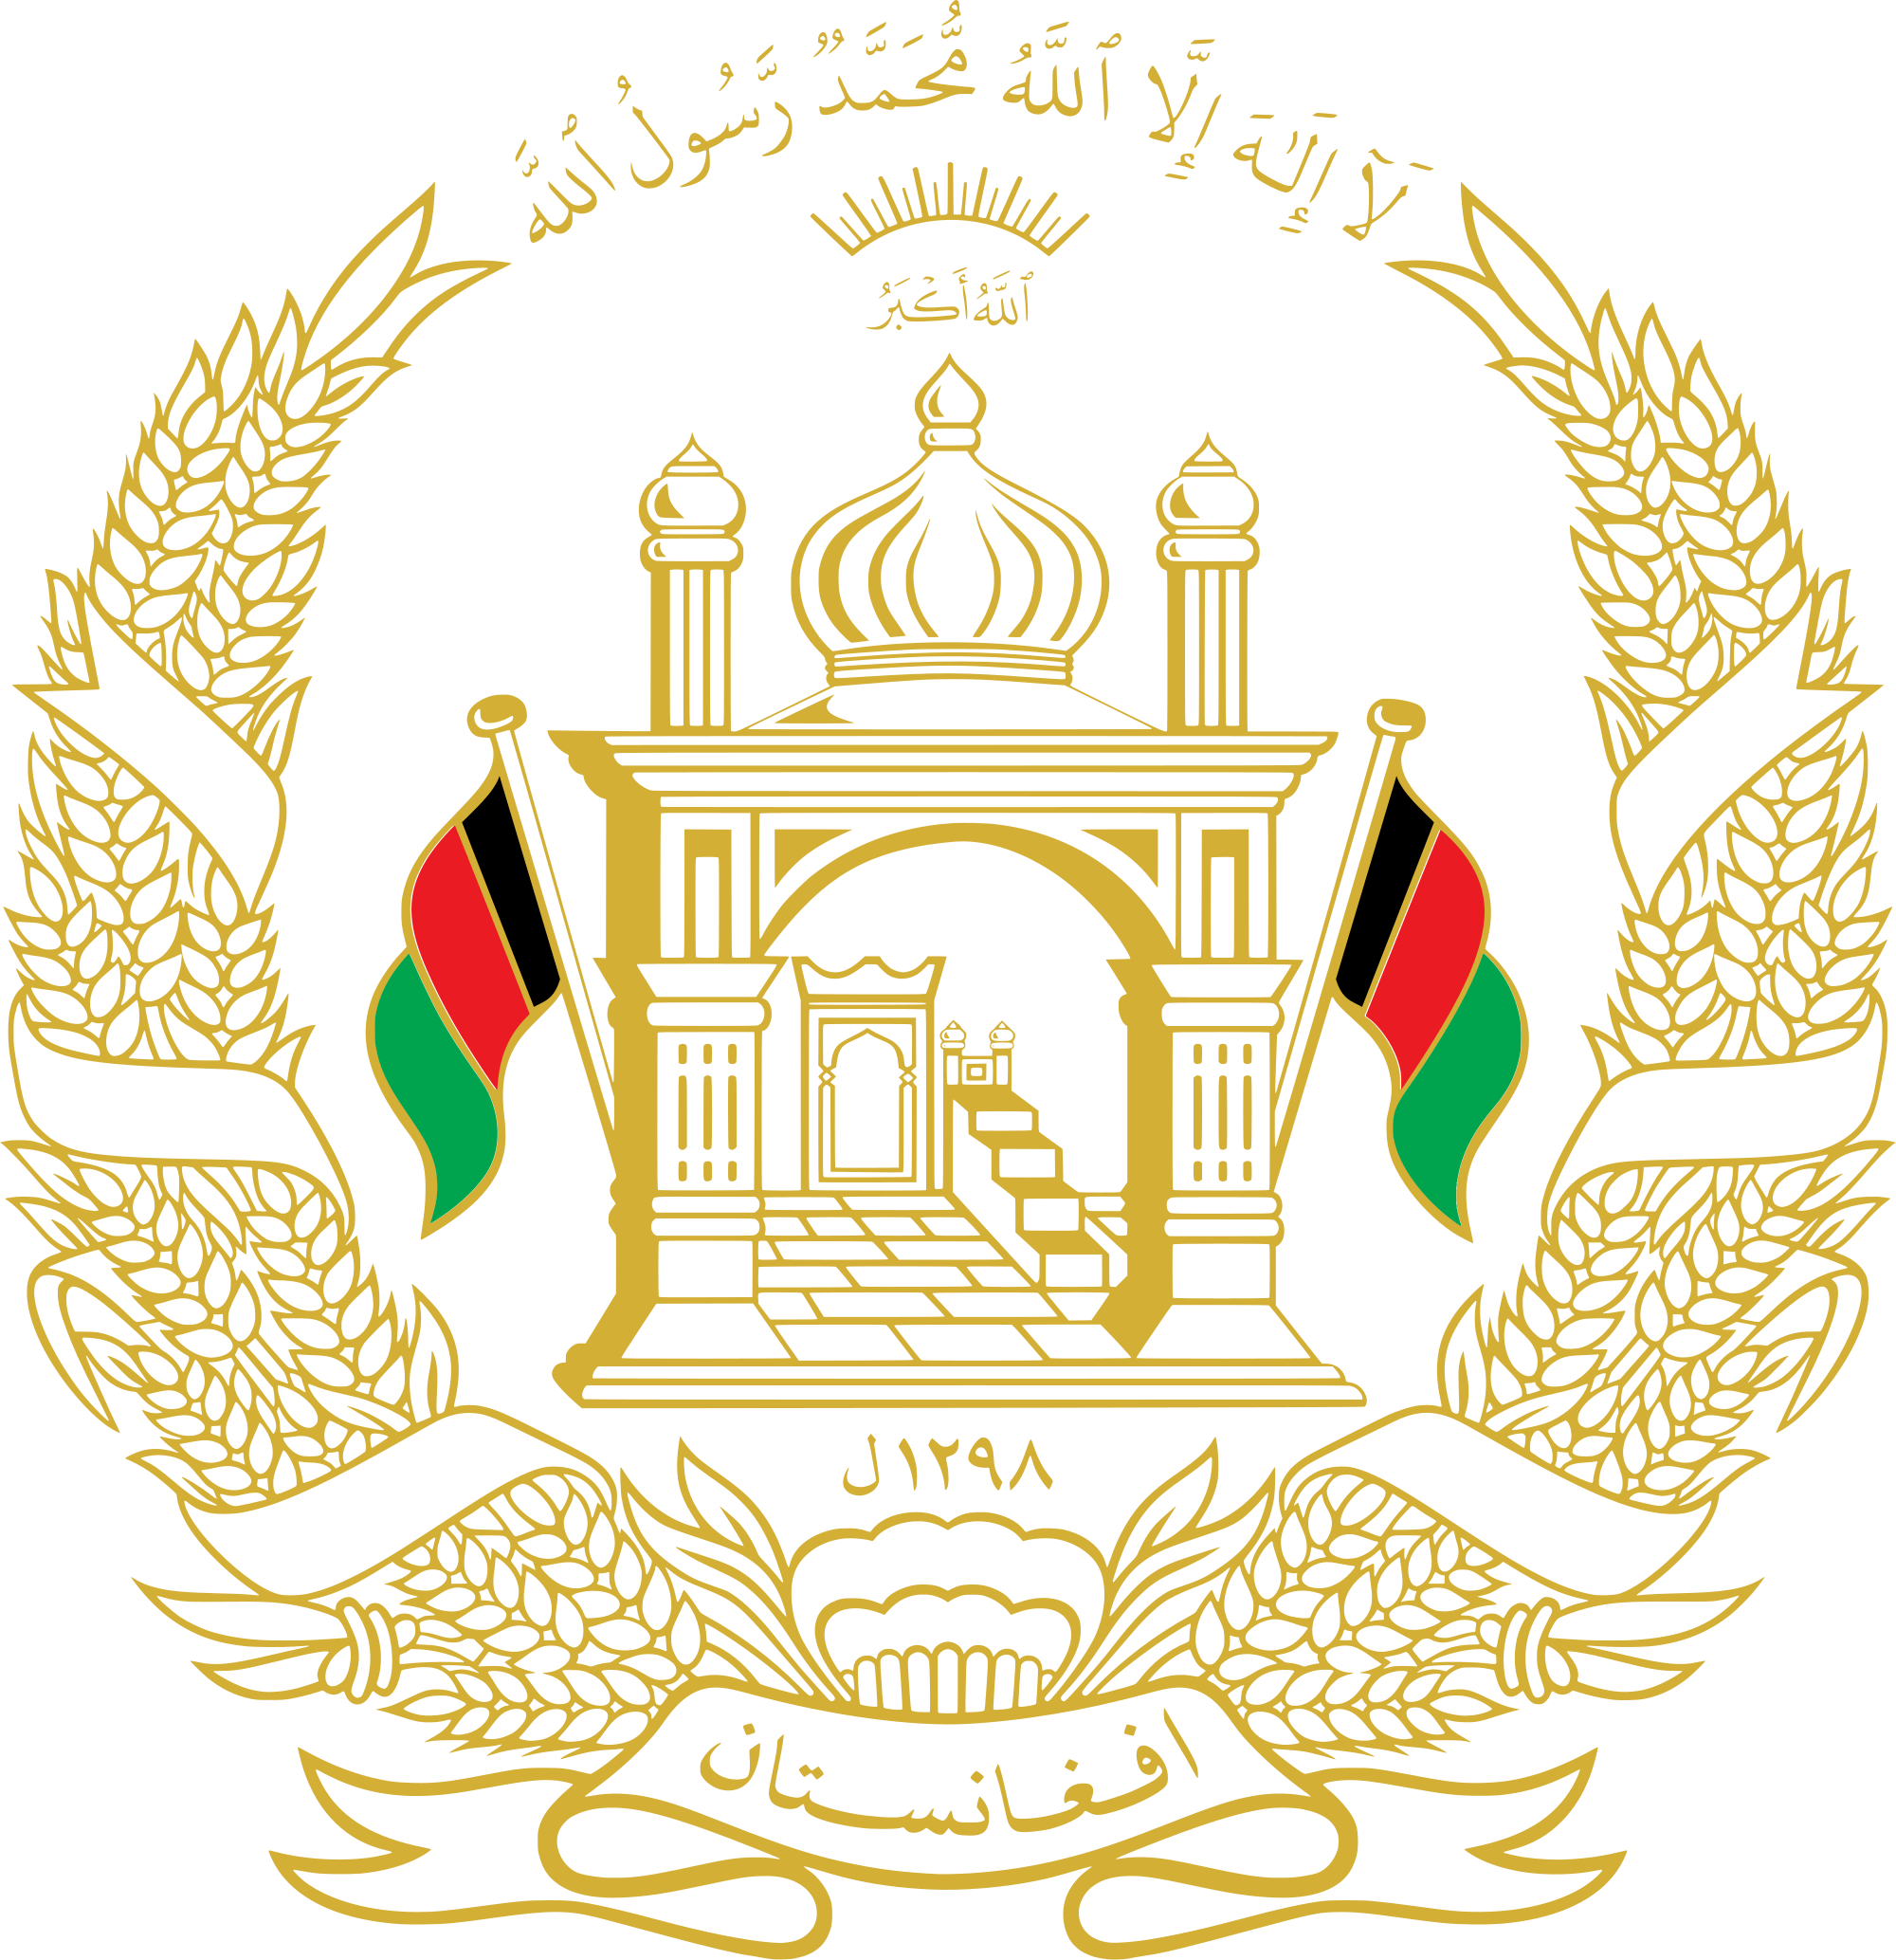 National emblem of Afghanistan. Photo: Collected